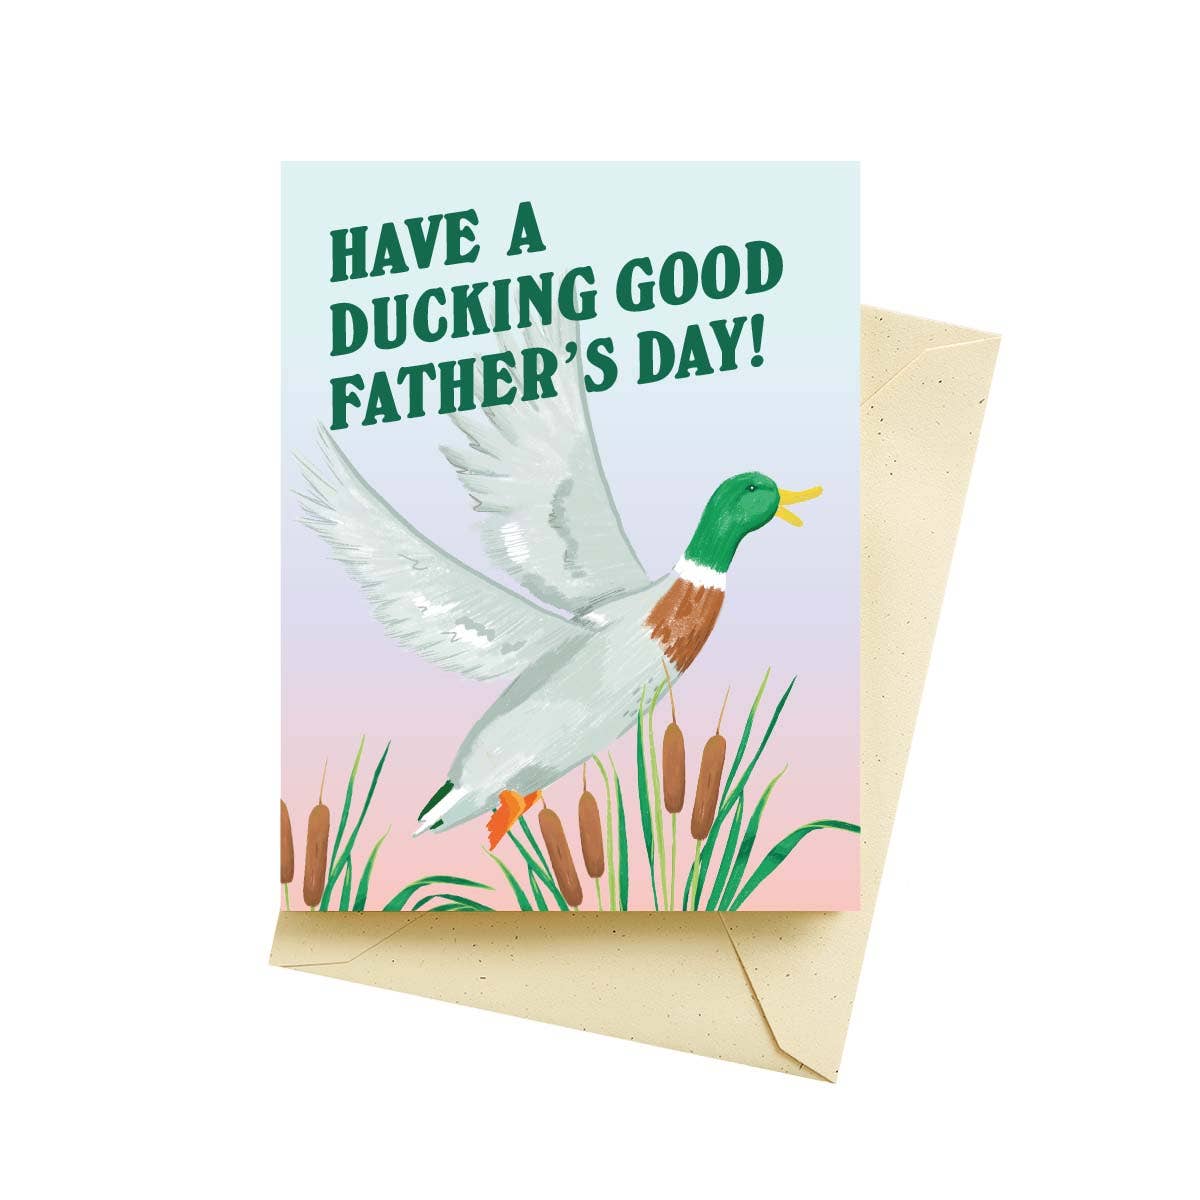 Ducking Great Father's Day Cards